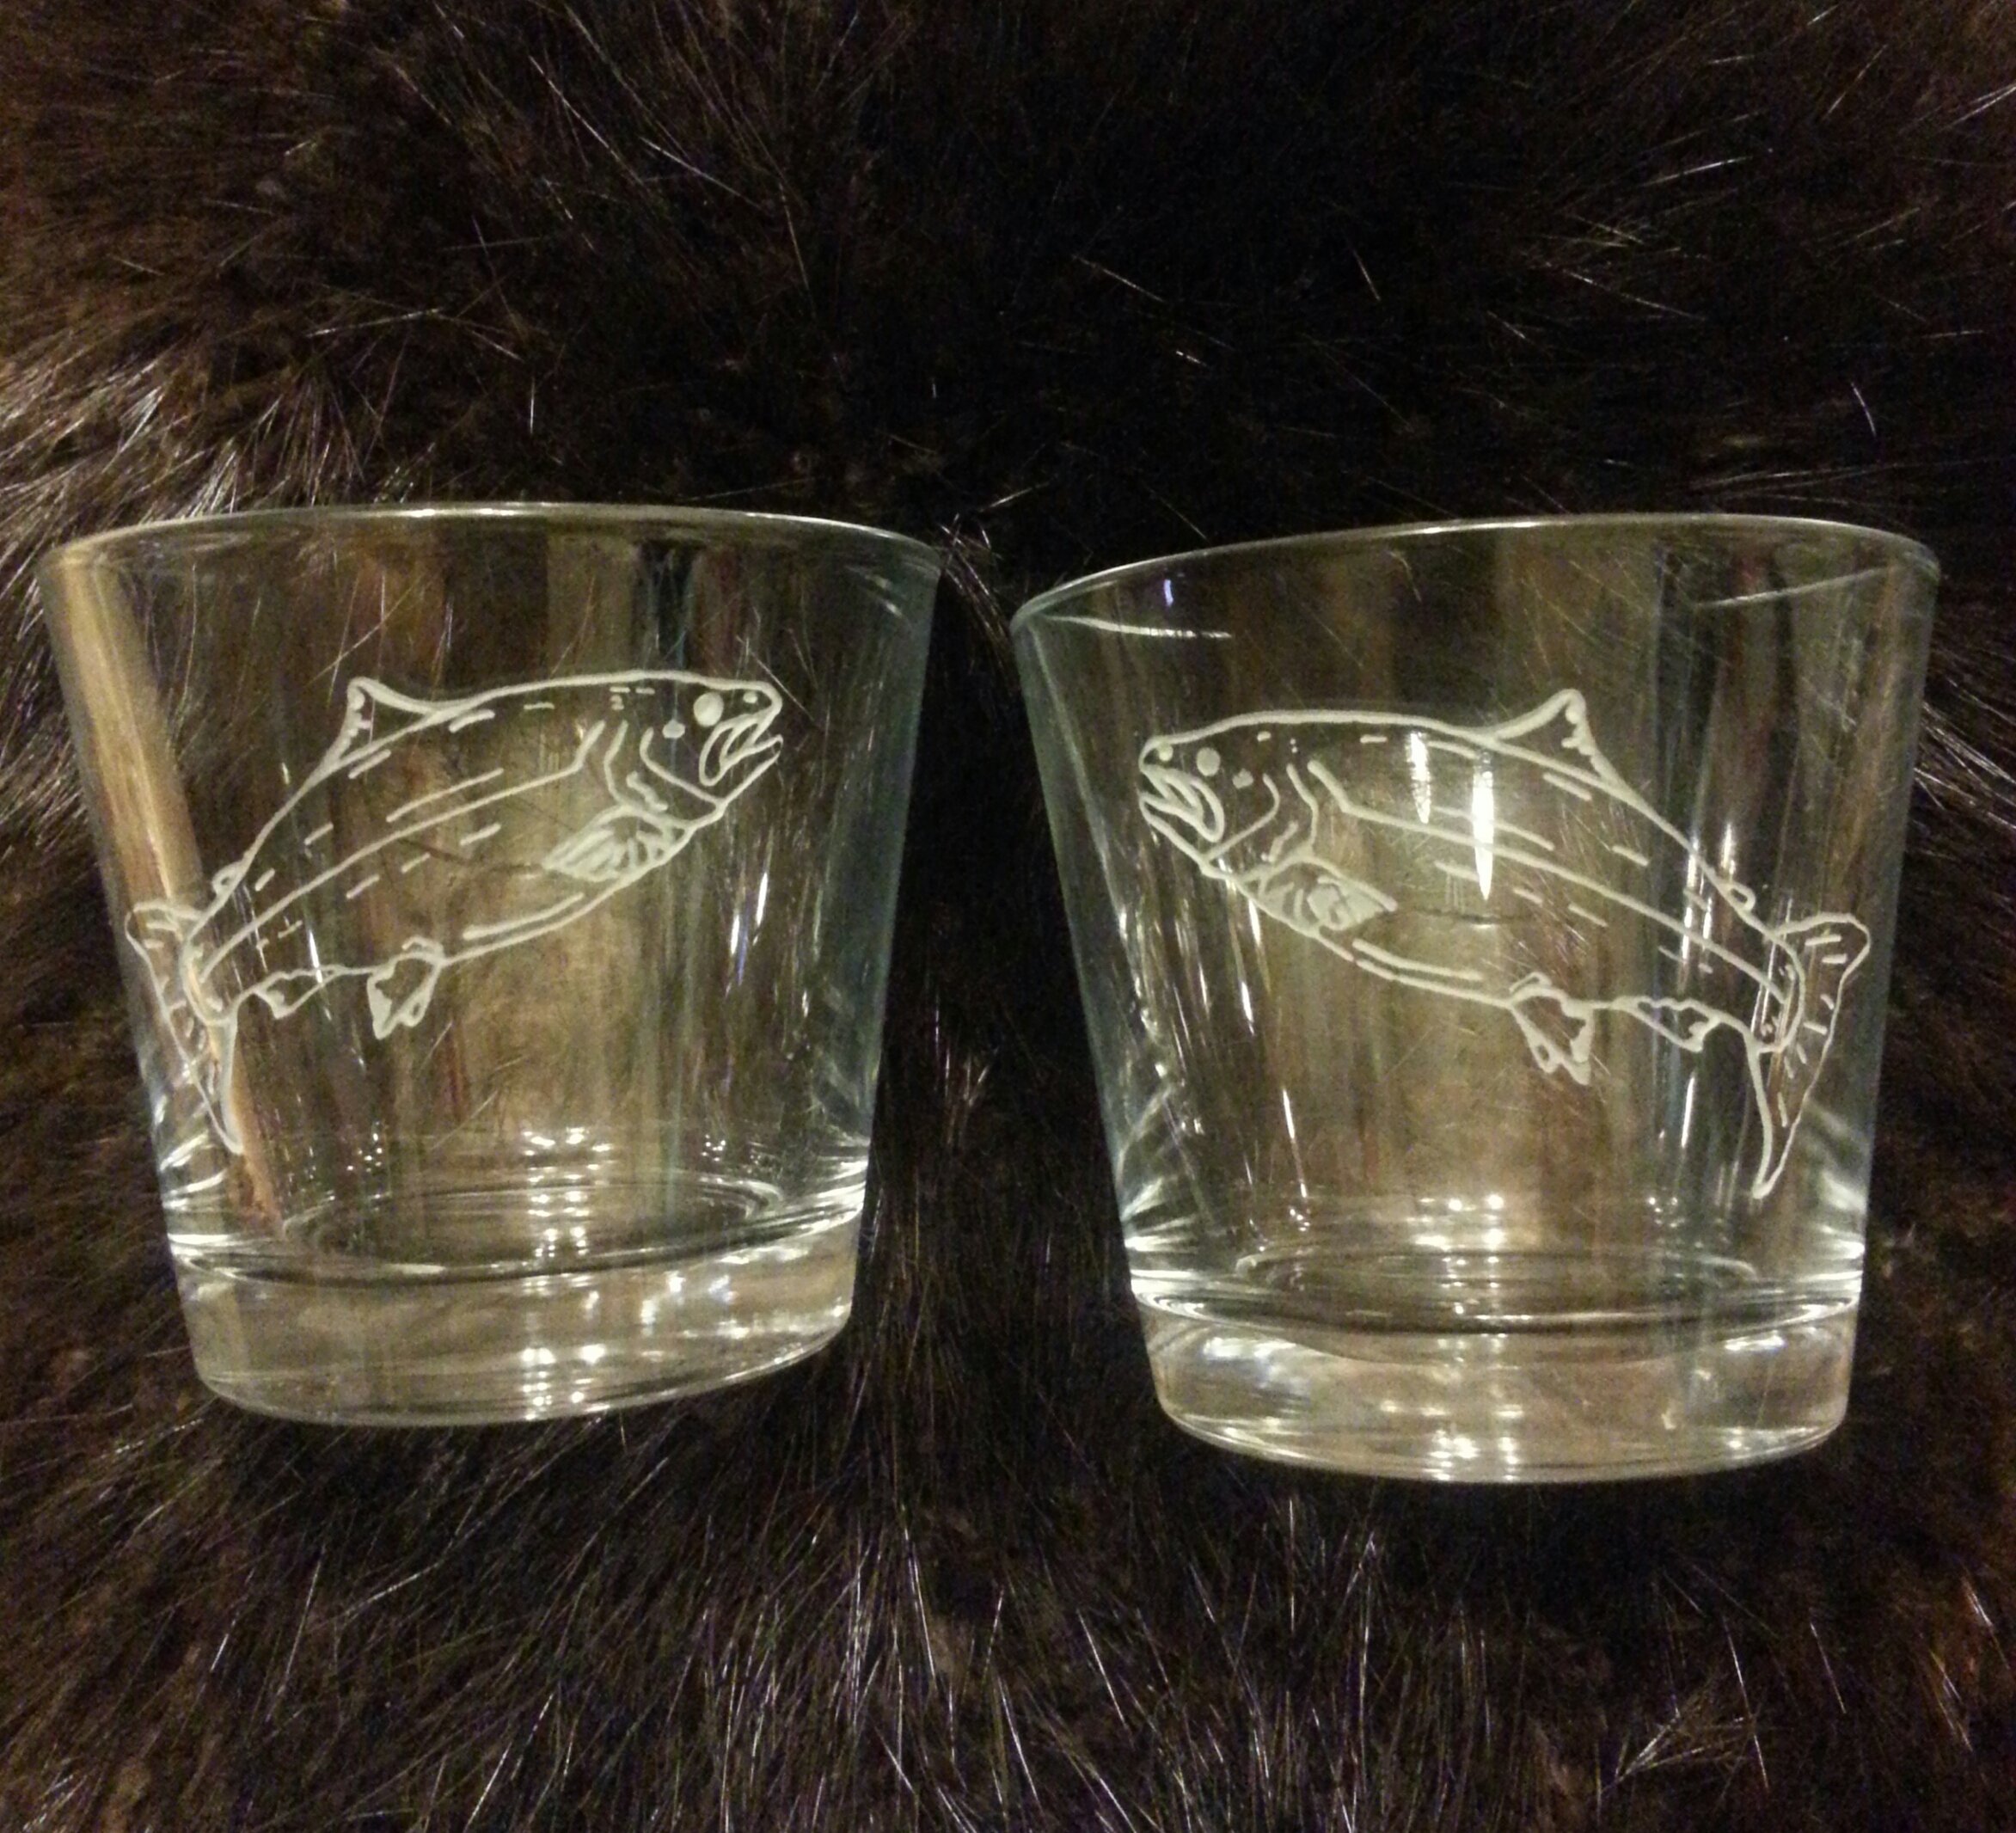 Salmon engraved old fashion glasses... $25.00 ea,  or $45 for 2...